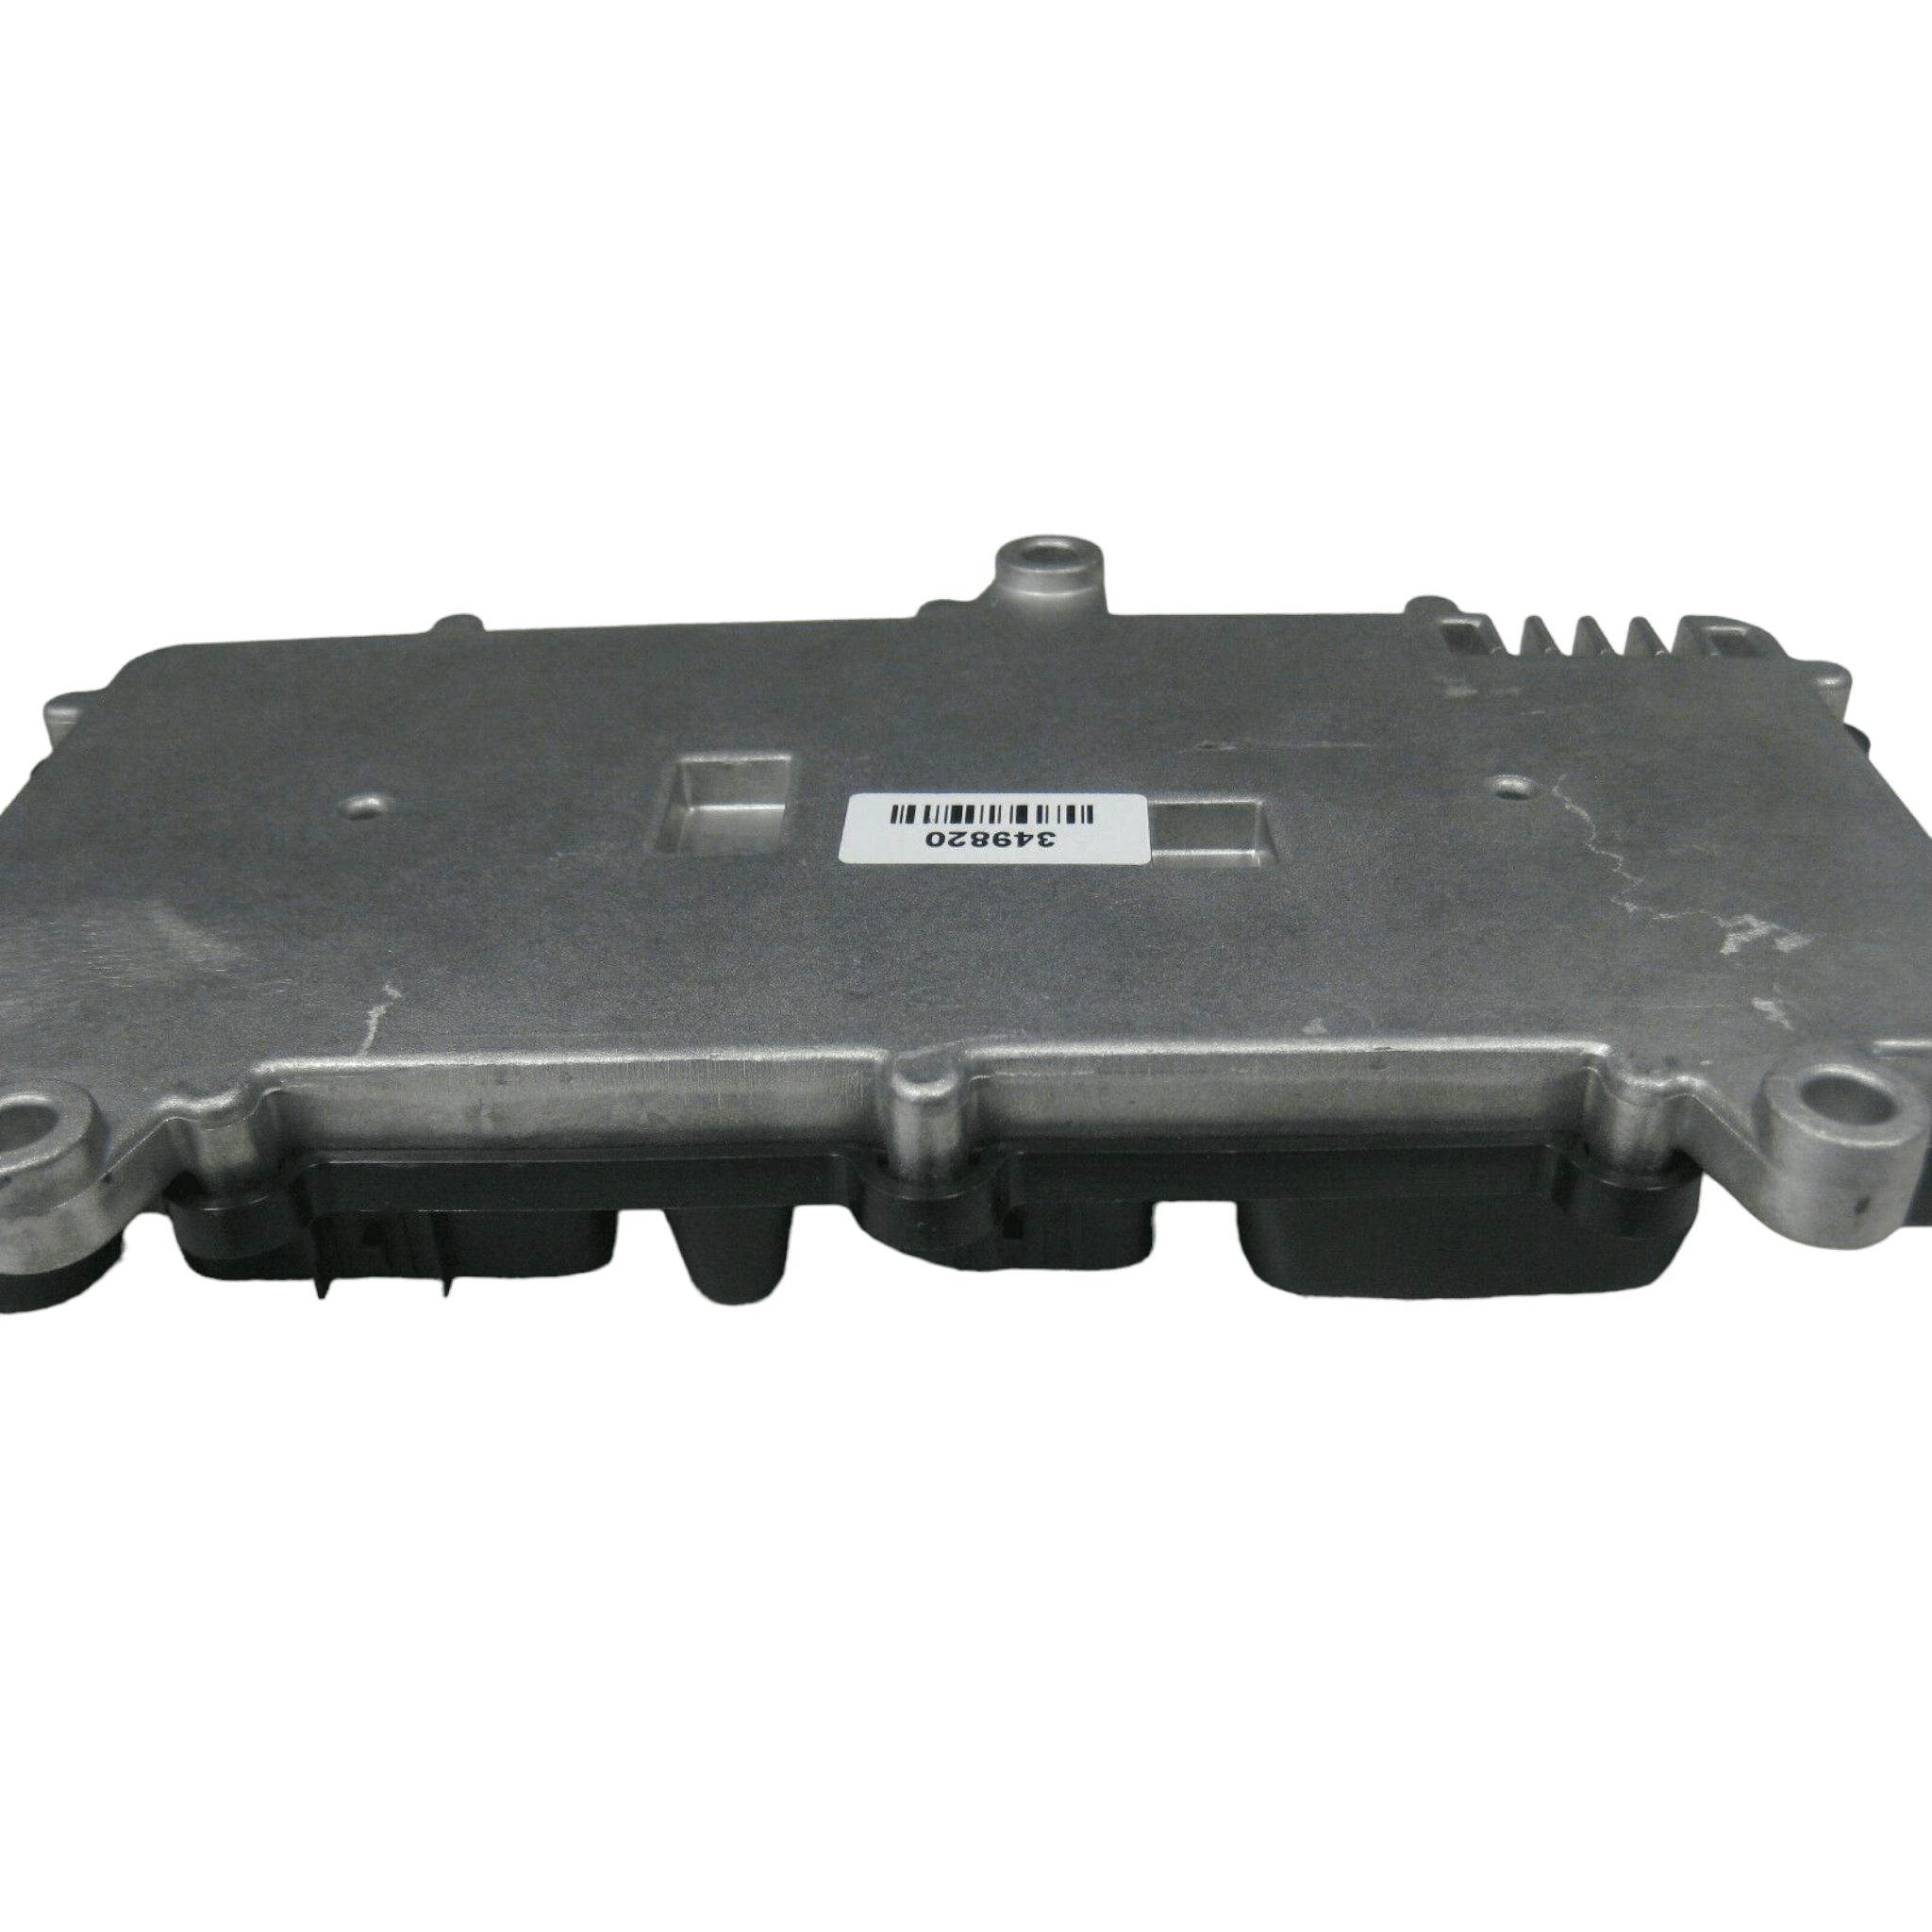 06-75158-000 Freightliner® M2 Bcm Body Control Module Chassis Vehicle Chm - ADVANCED TRUCK PARTS